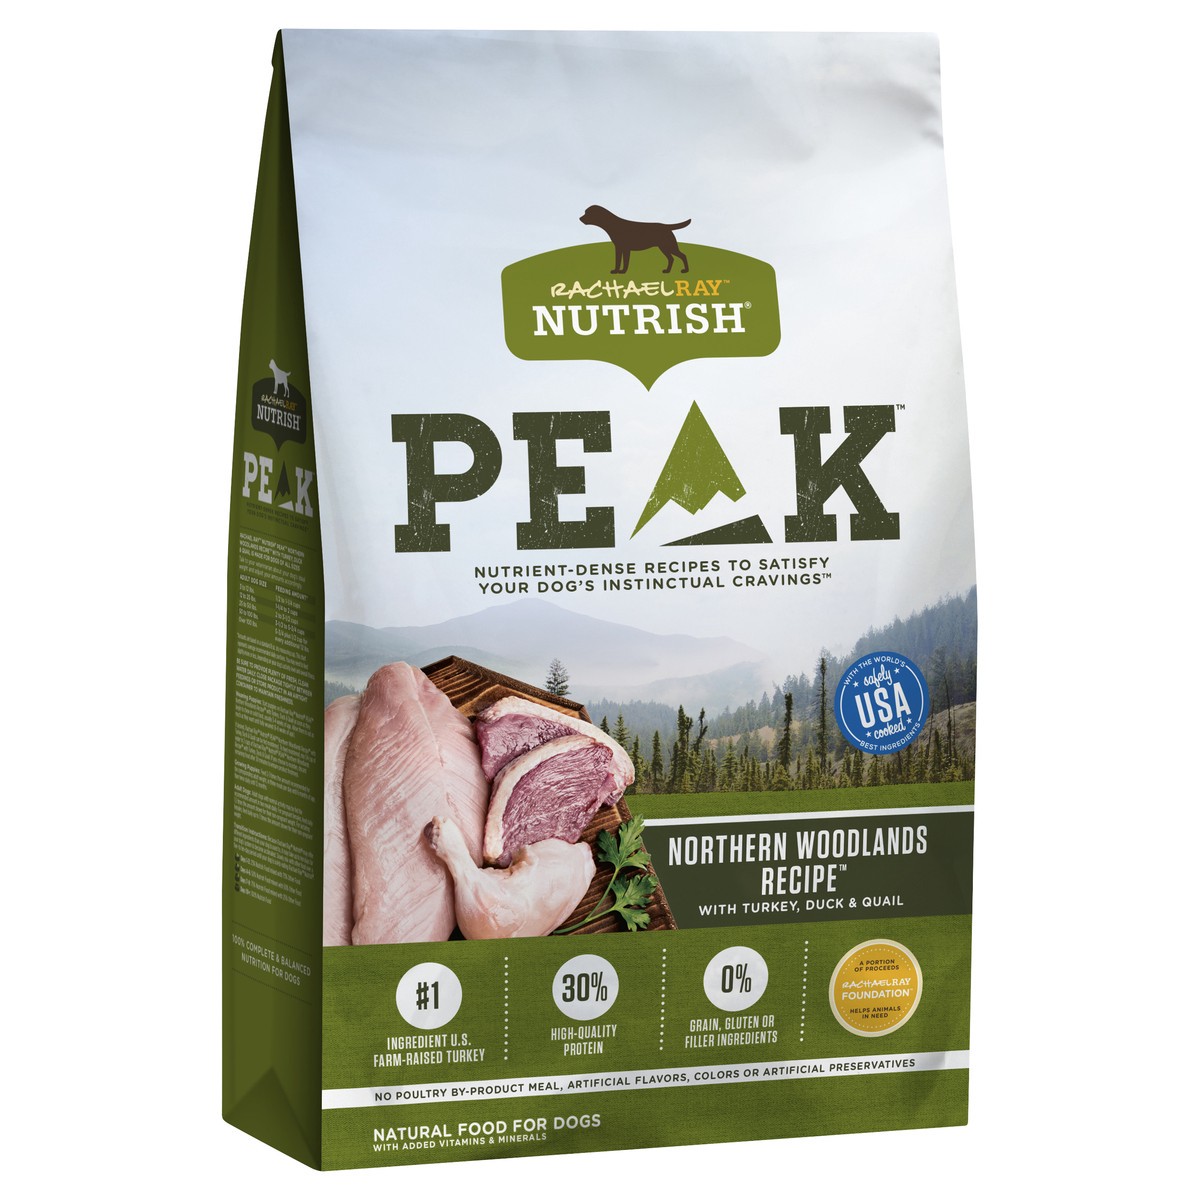 slide 2 of 8, Rachael Ray Nutrish Peak Northern Woodlands Recipe With Turkey, Duck & Quail, Dry Dog Food, 4 lb Bag (Packaging May Vary), 4 lb